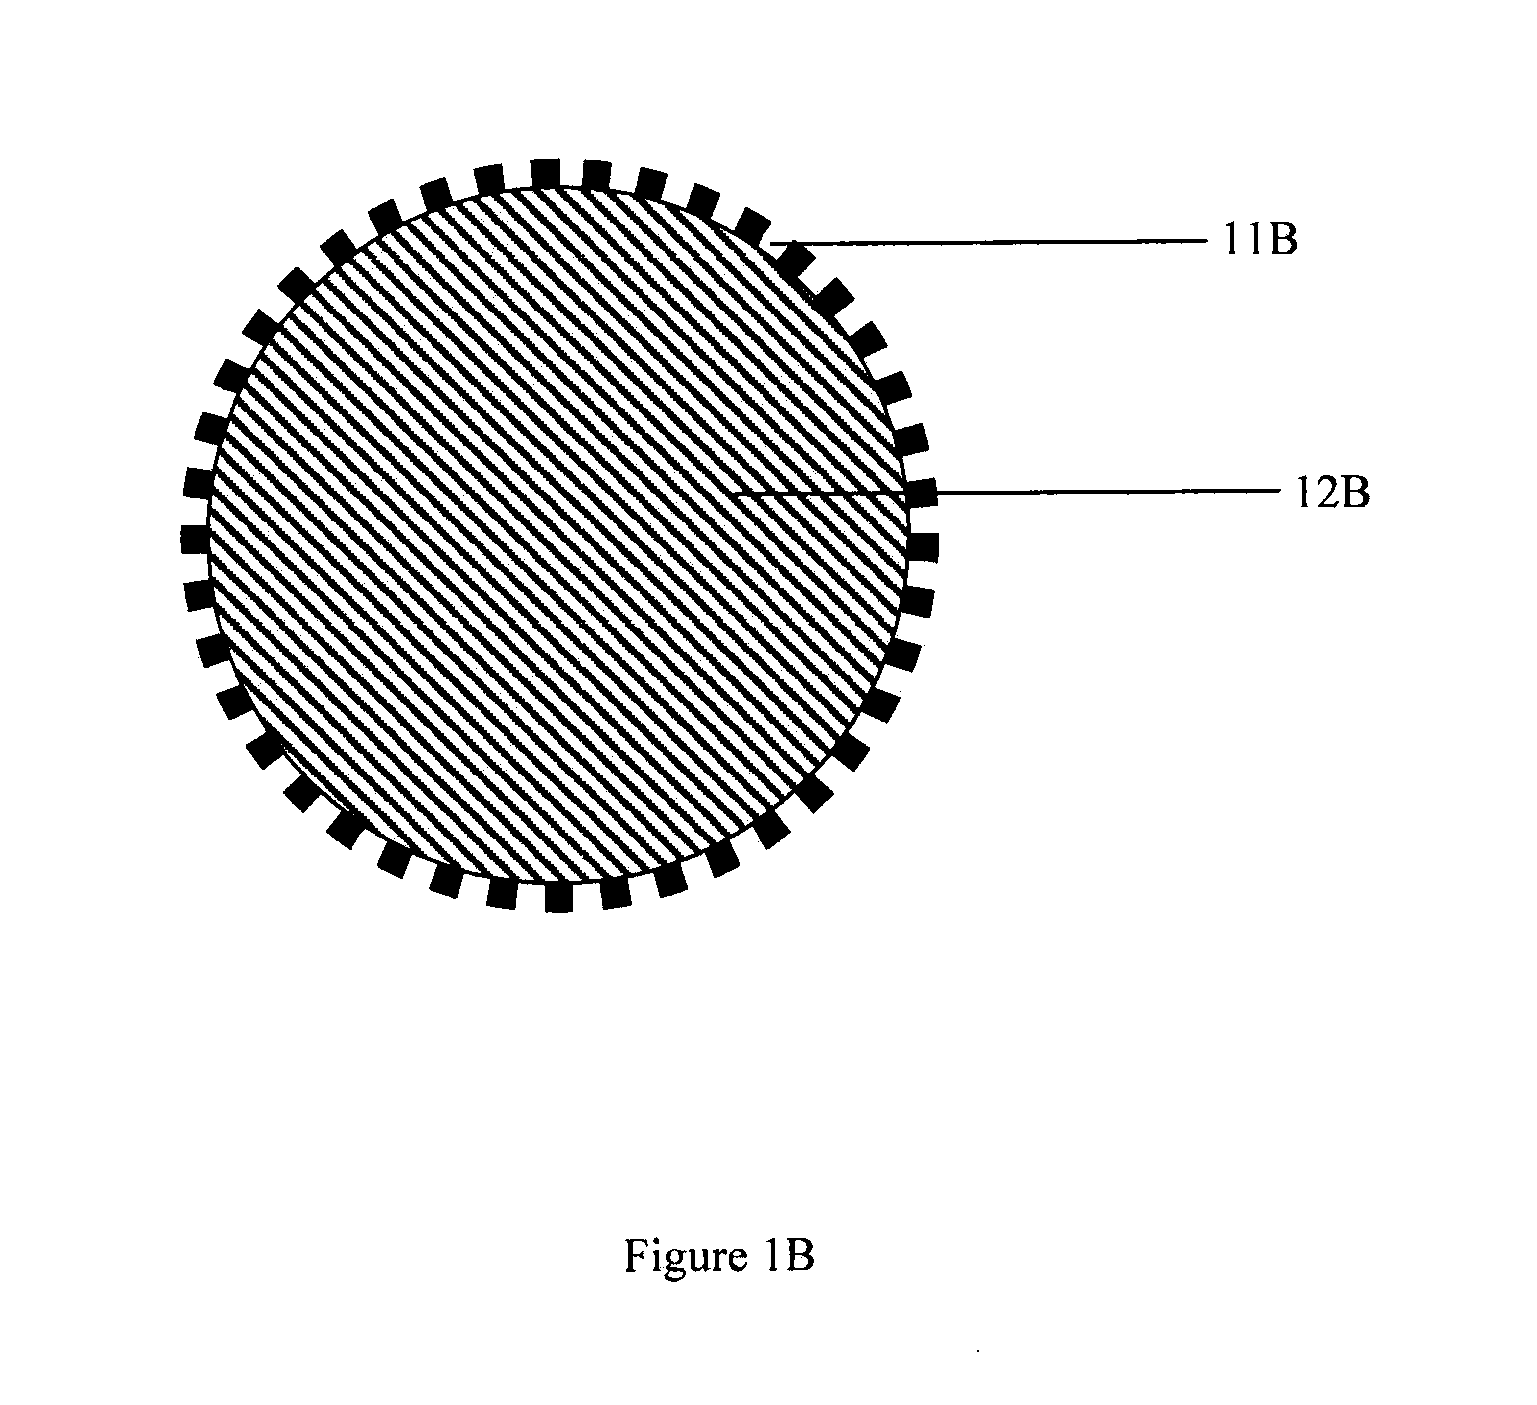 Highly electrically conductive surfaces for electrochemical applications and methods to produce same